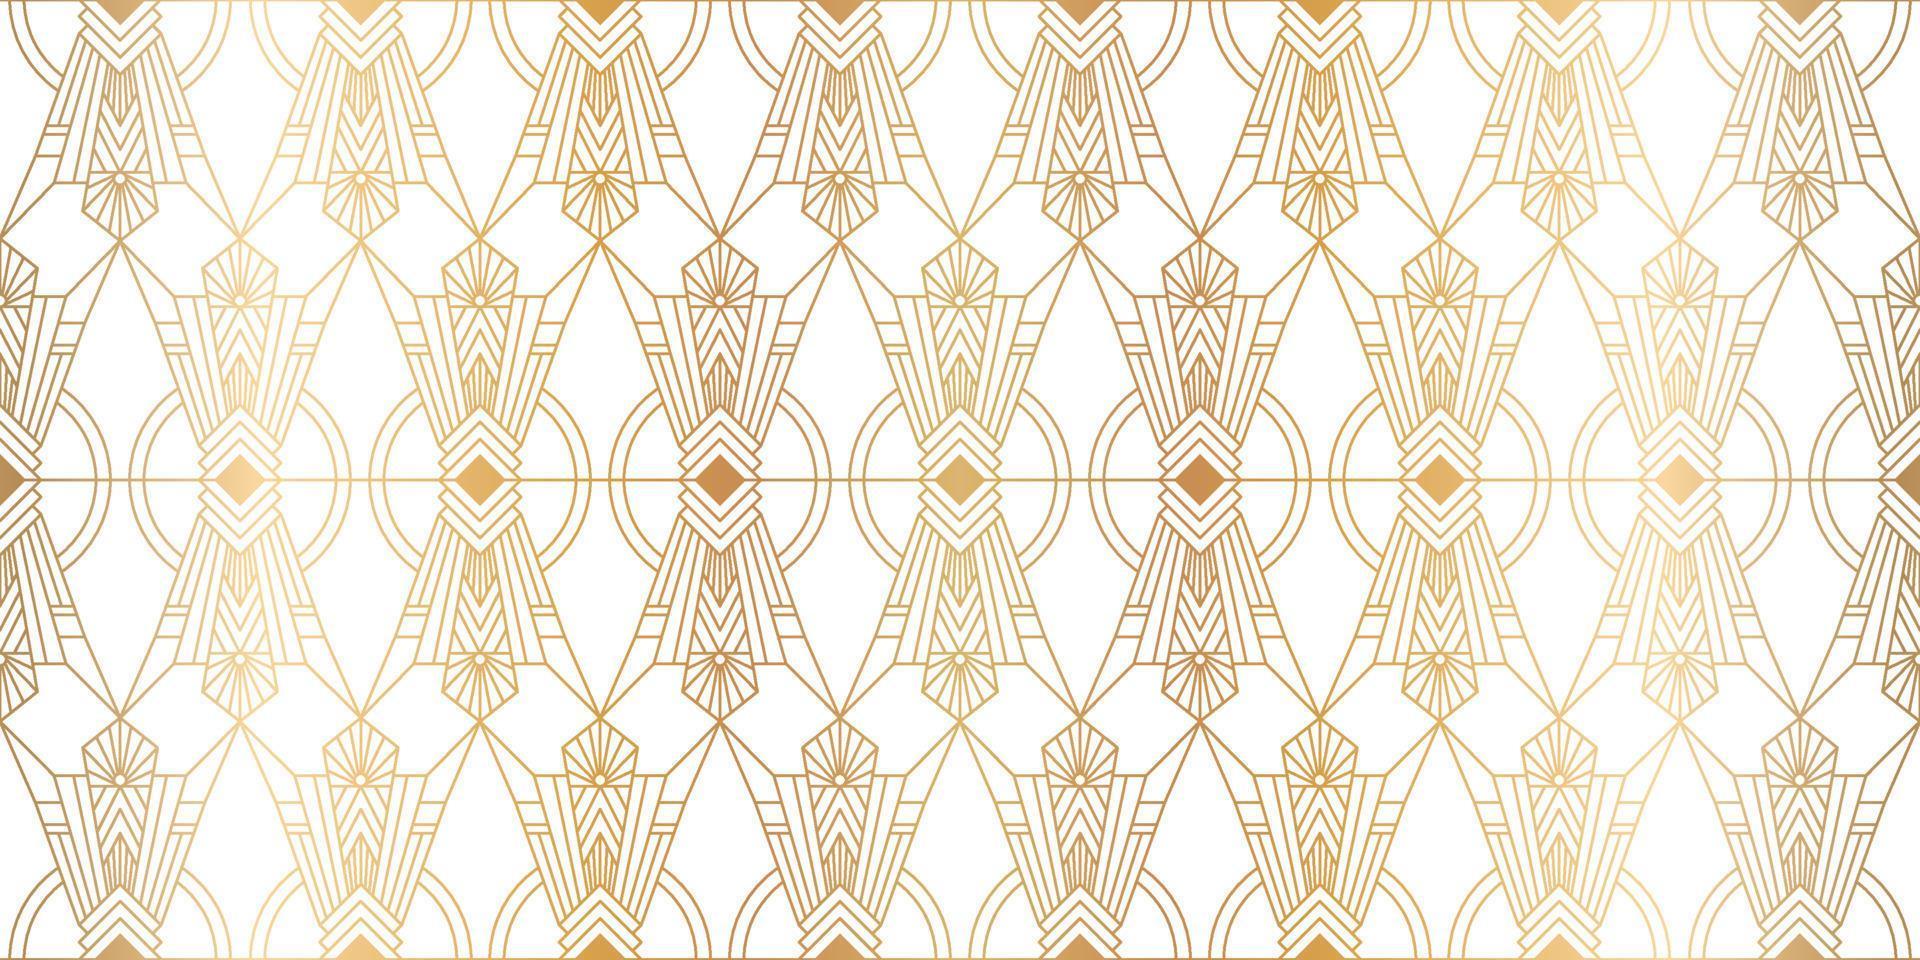 Luxury art deco seamless pattern background vector. Abstract elegant art nouveau with delicate golden geometric line vintage decorative minimalist texture style. Design for wallpaper, banner, card. vector